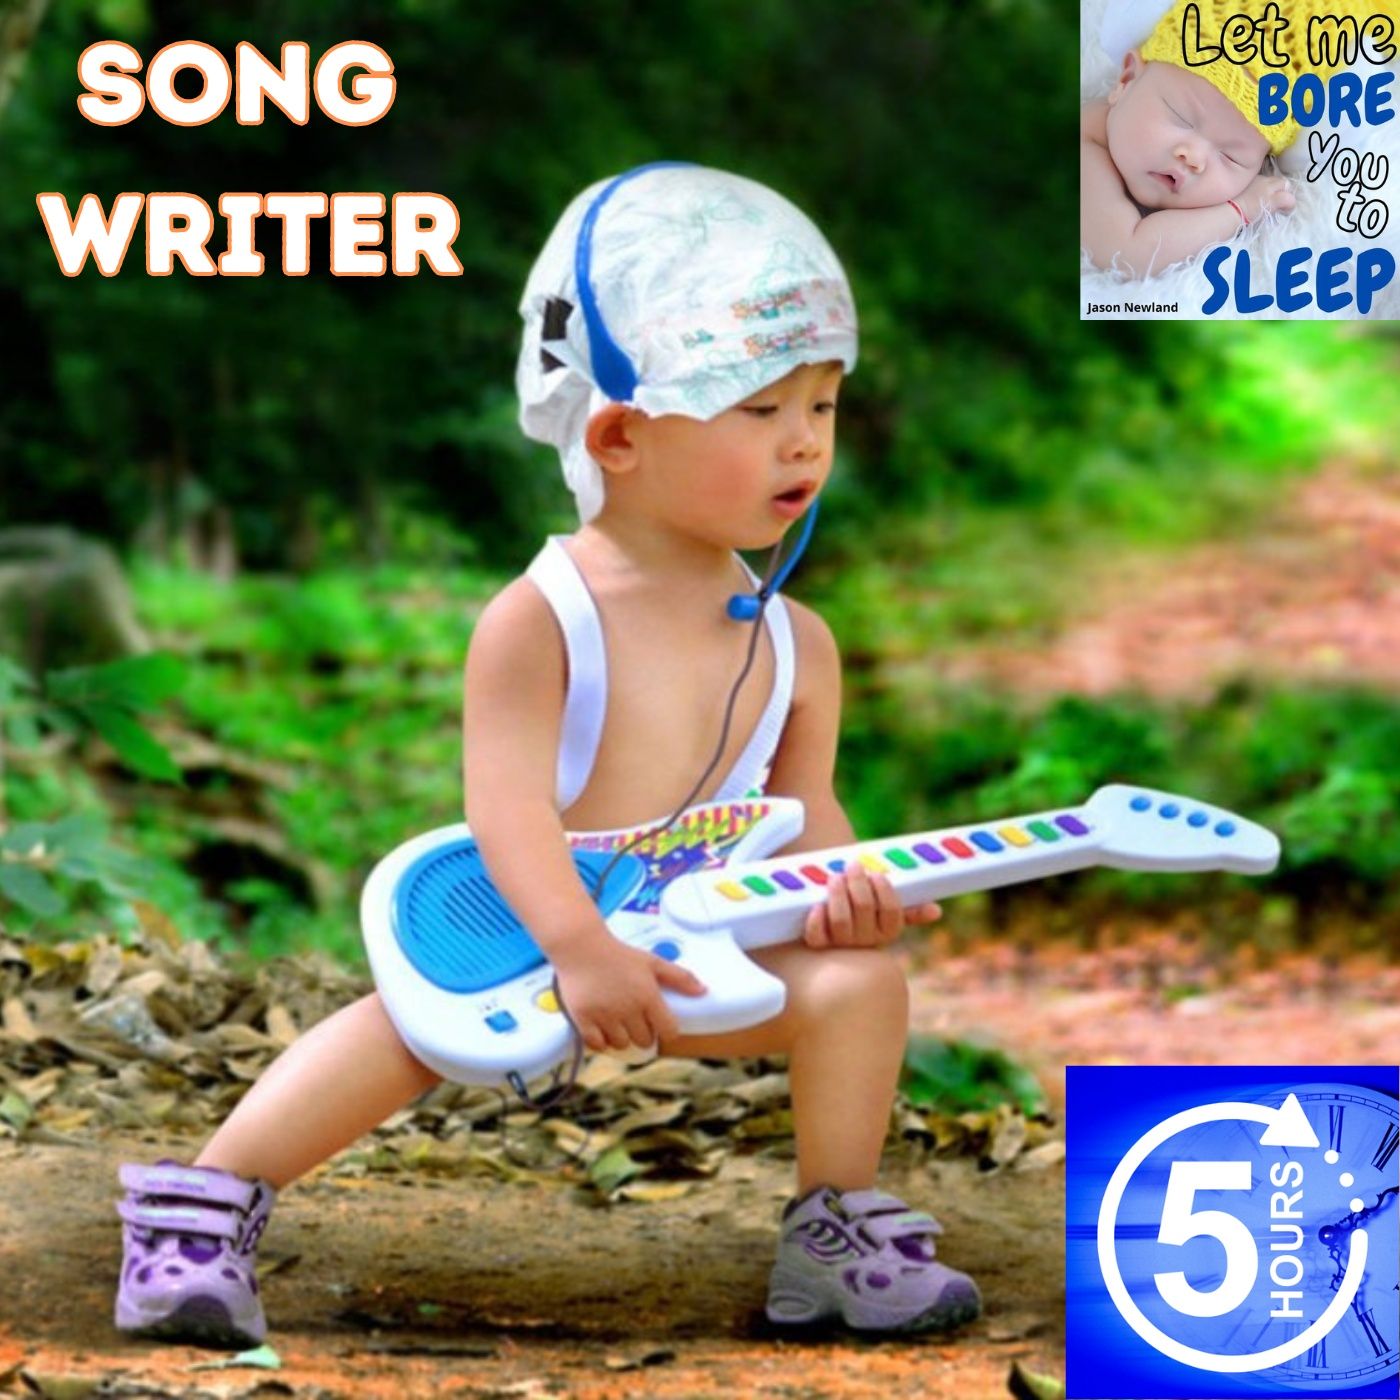 (5 hours) #1048 - Song writer - Let me bore you to sleep